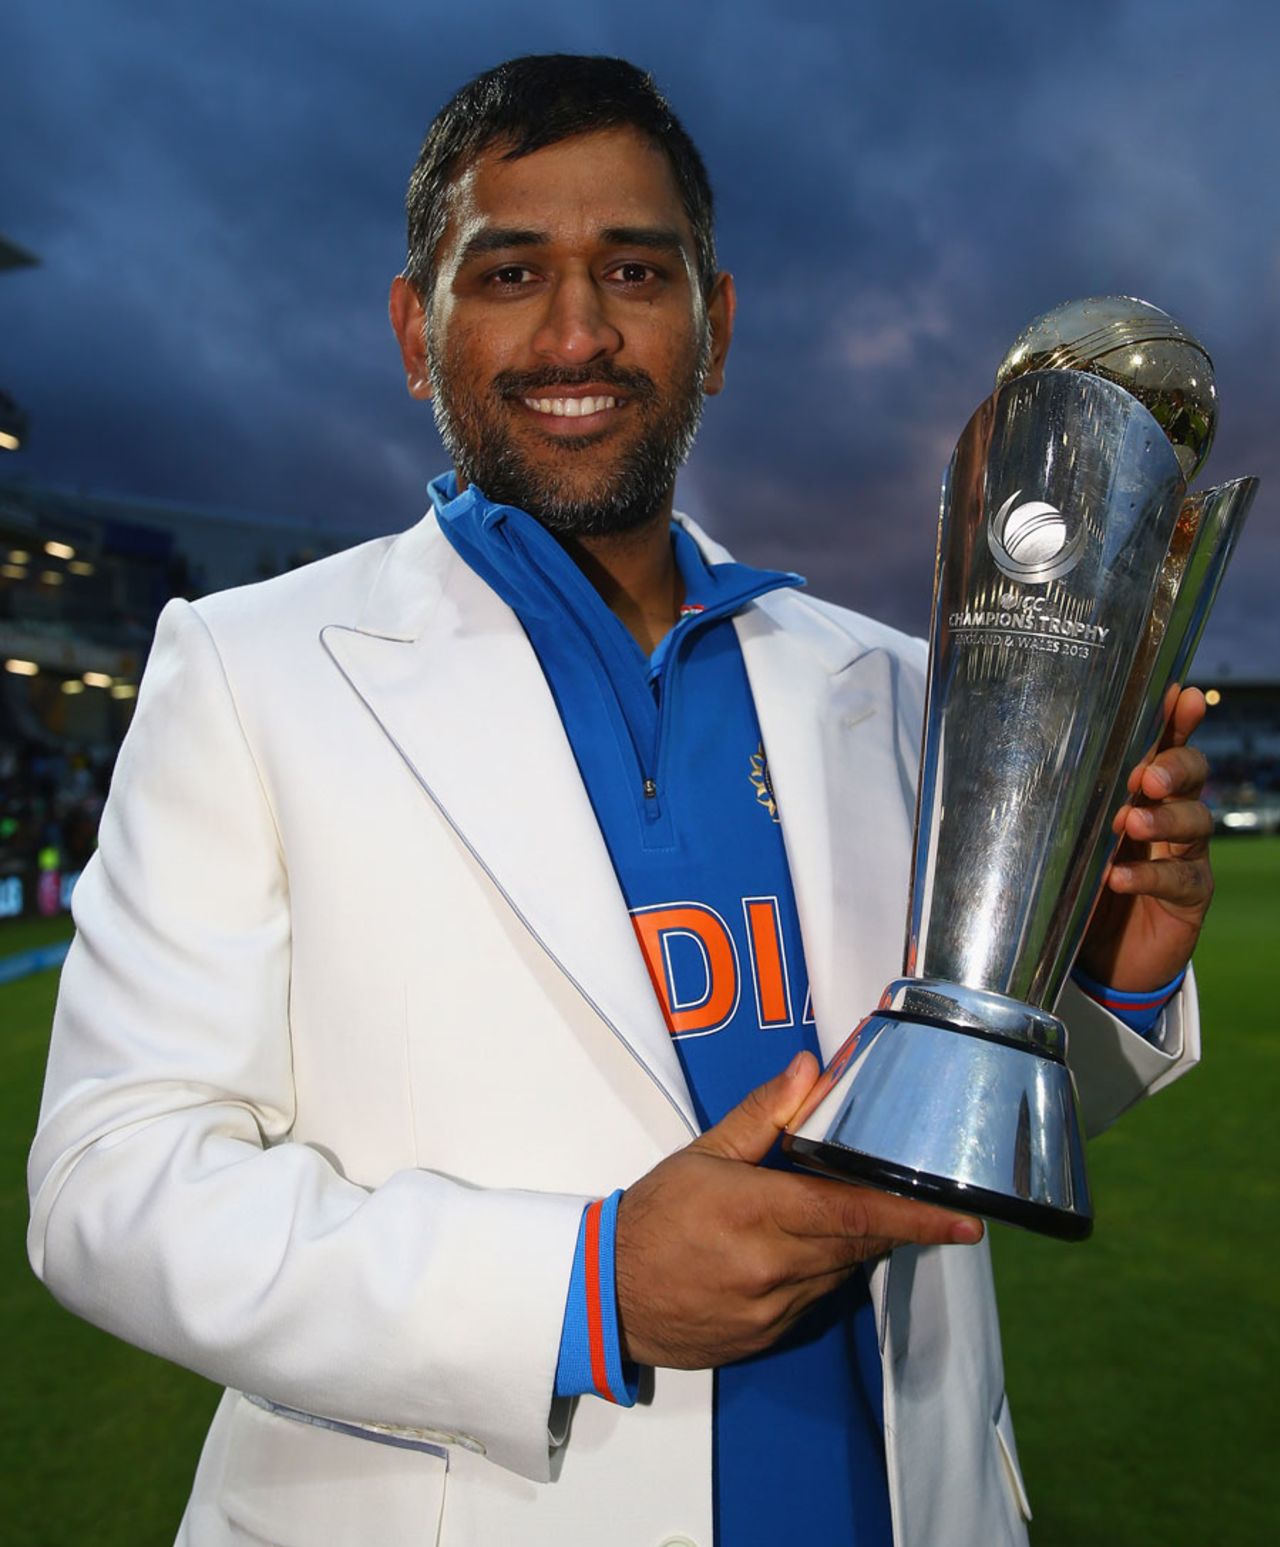 MS Dhoni with the trophy, England v India, Champions Trophy final, Edgbaston, June 23, 2013